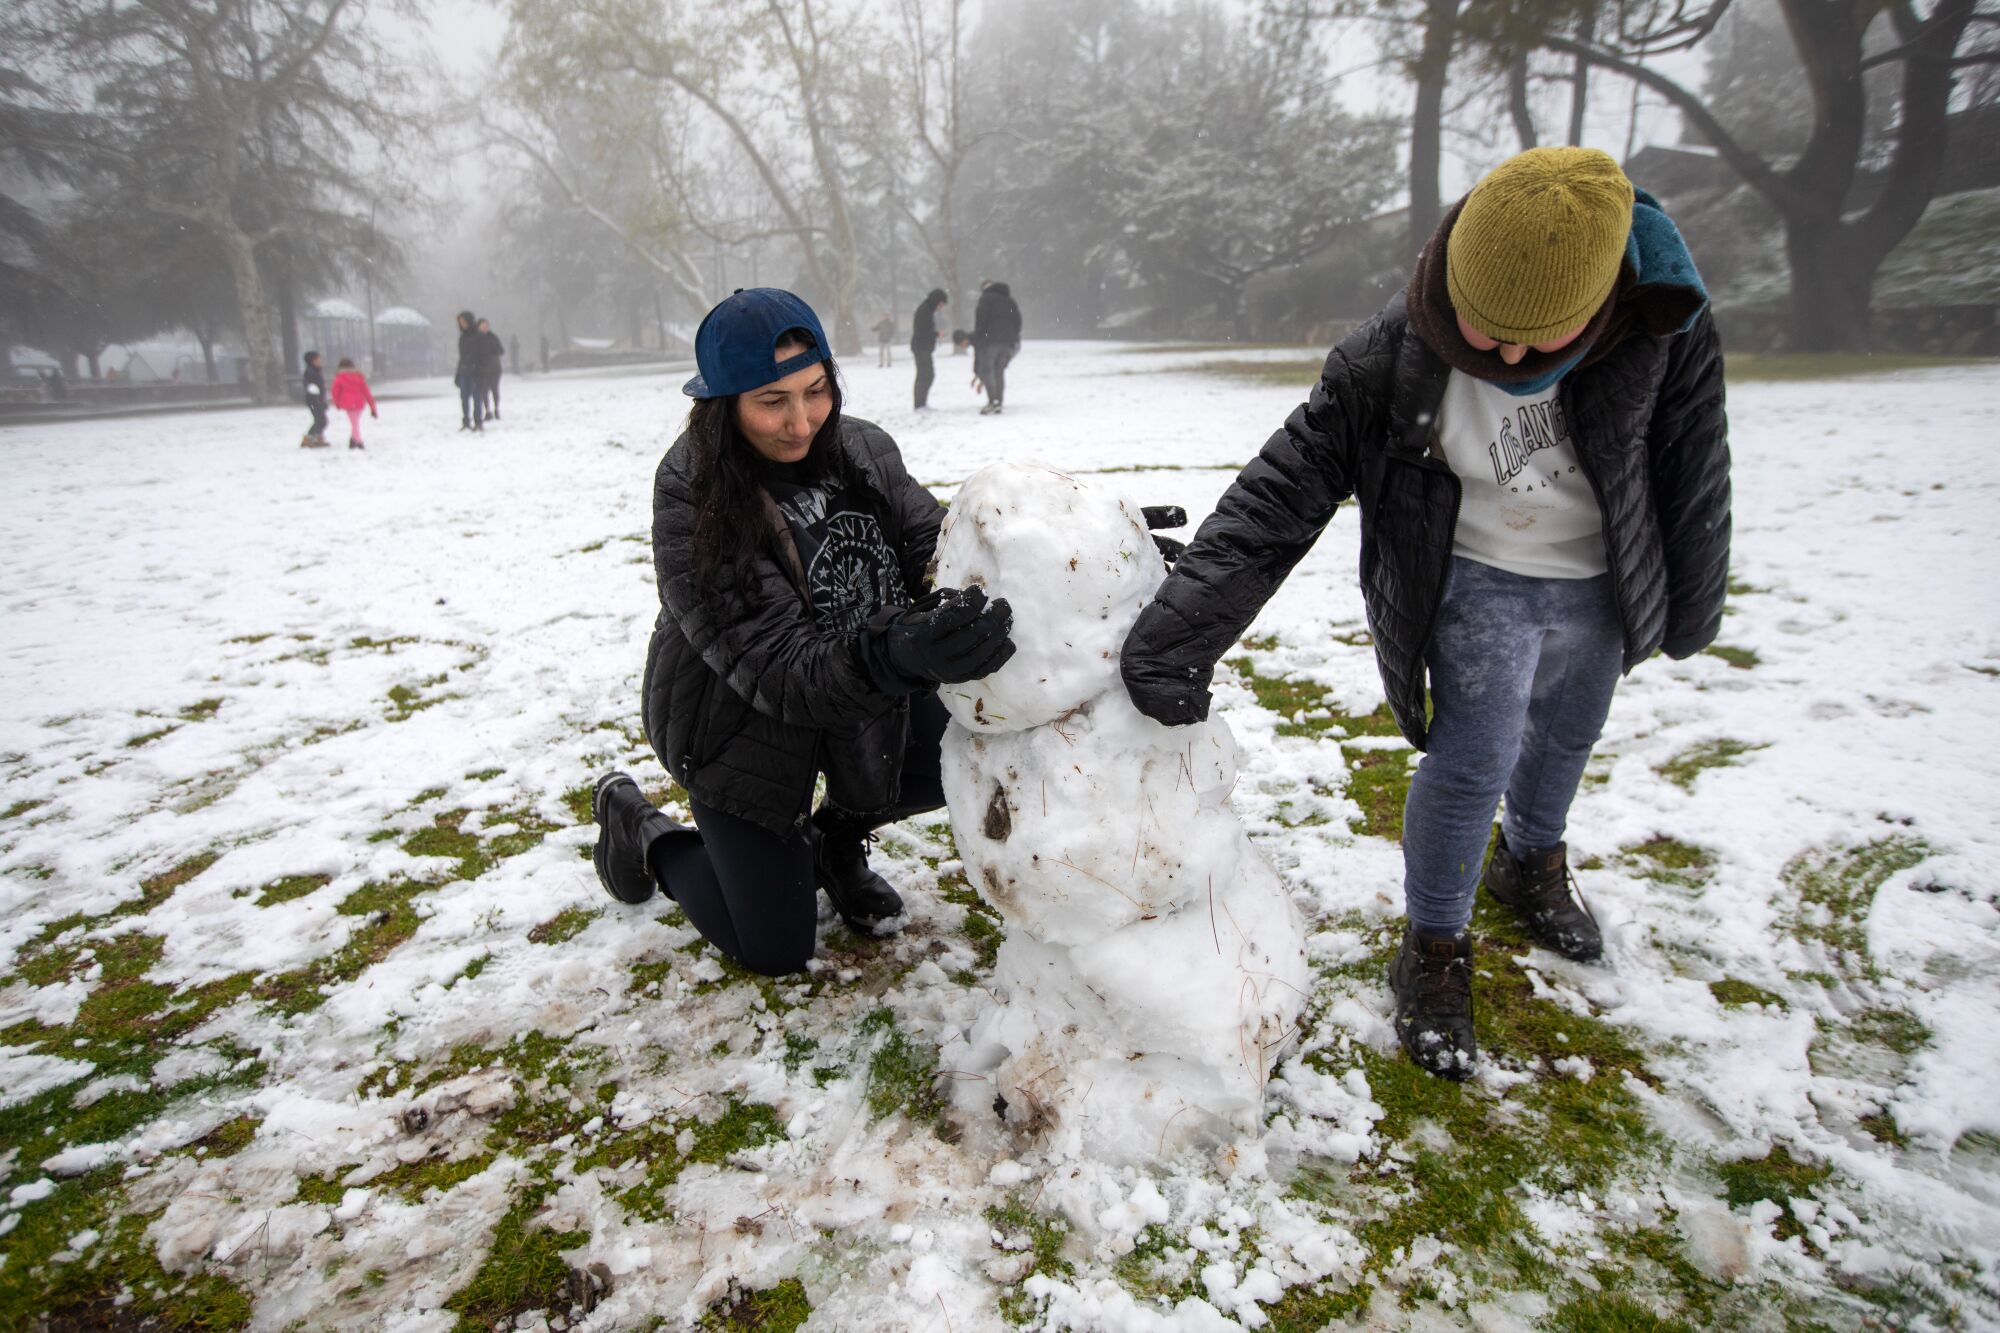 Lusin Torosyan, left, and her child Shant Yedigaryan, 12, build a snowman in Dunsmore Park in Glendale.